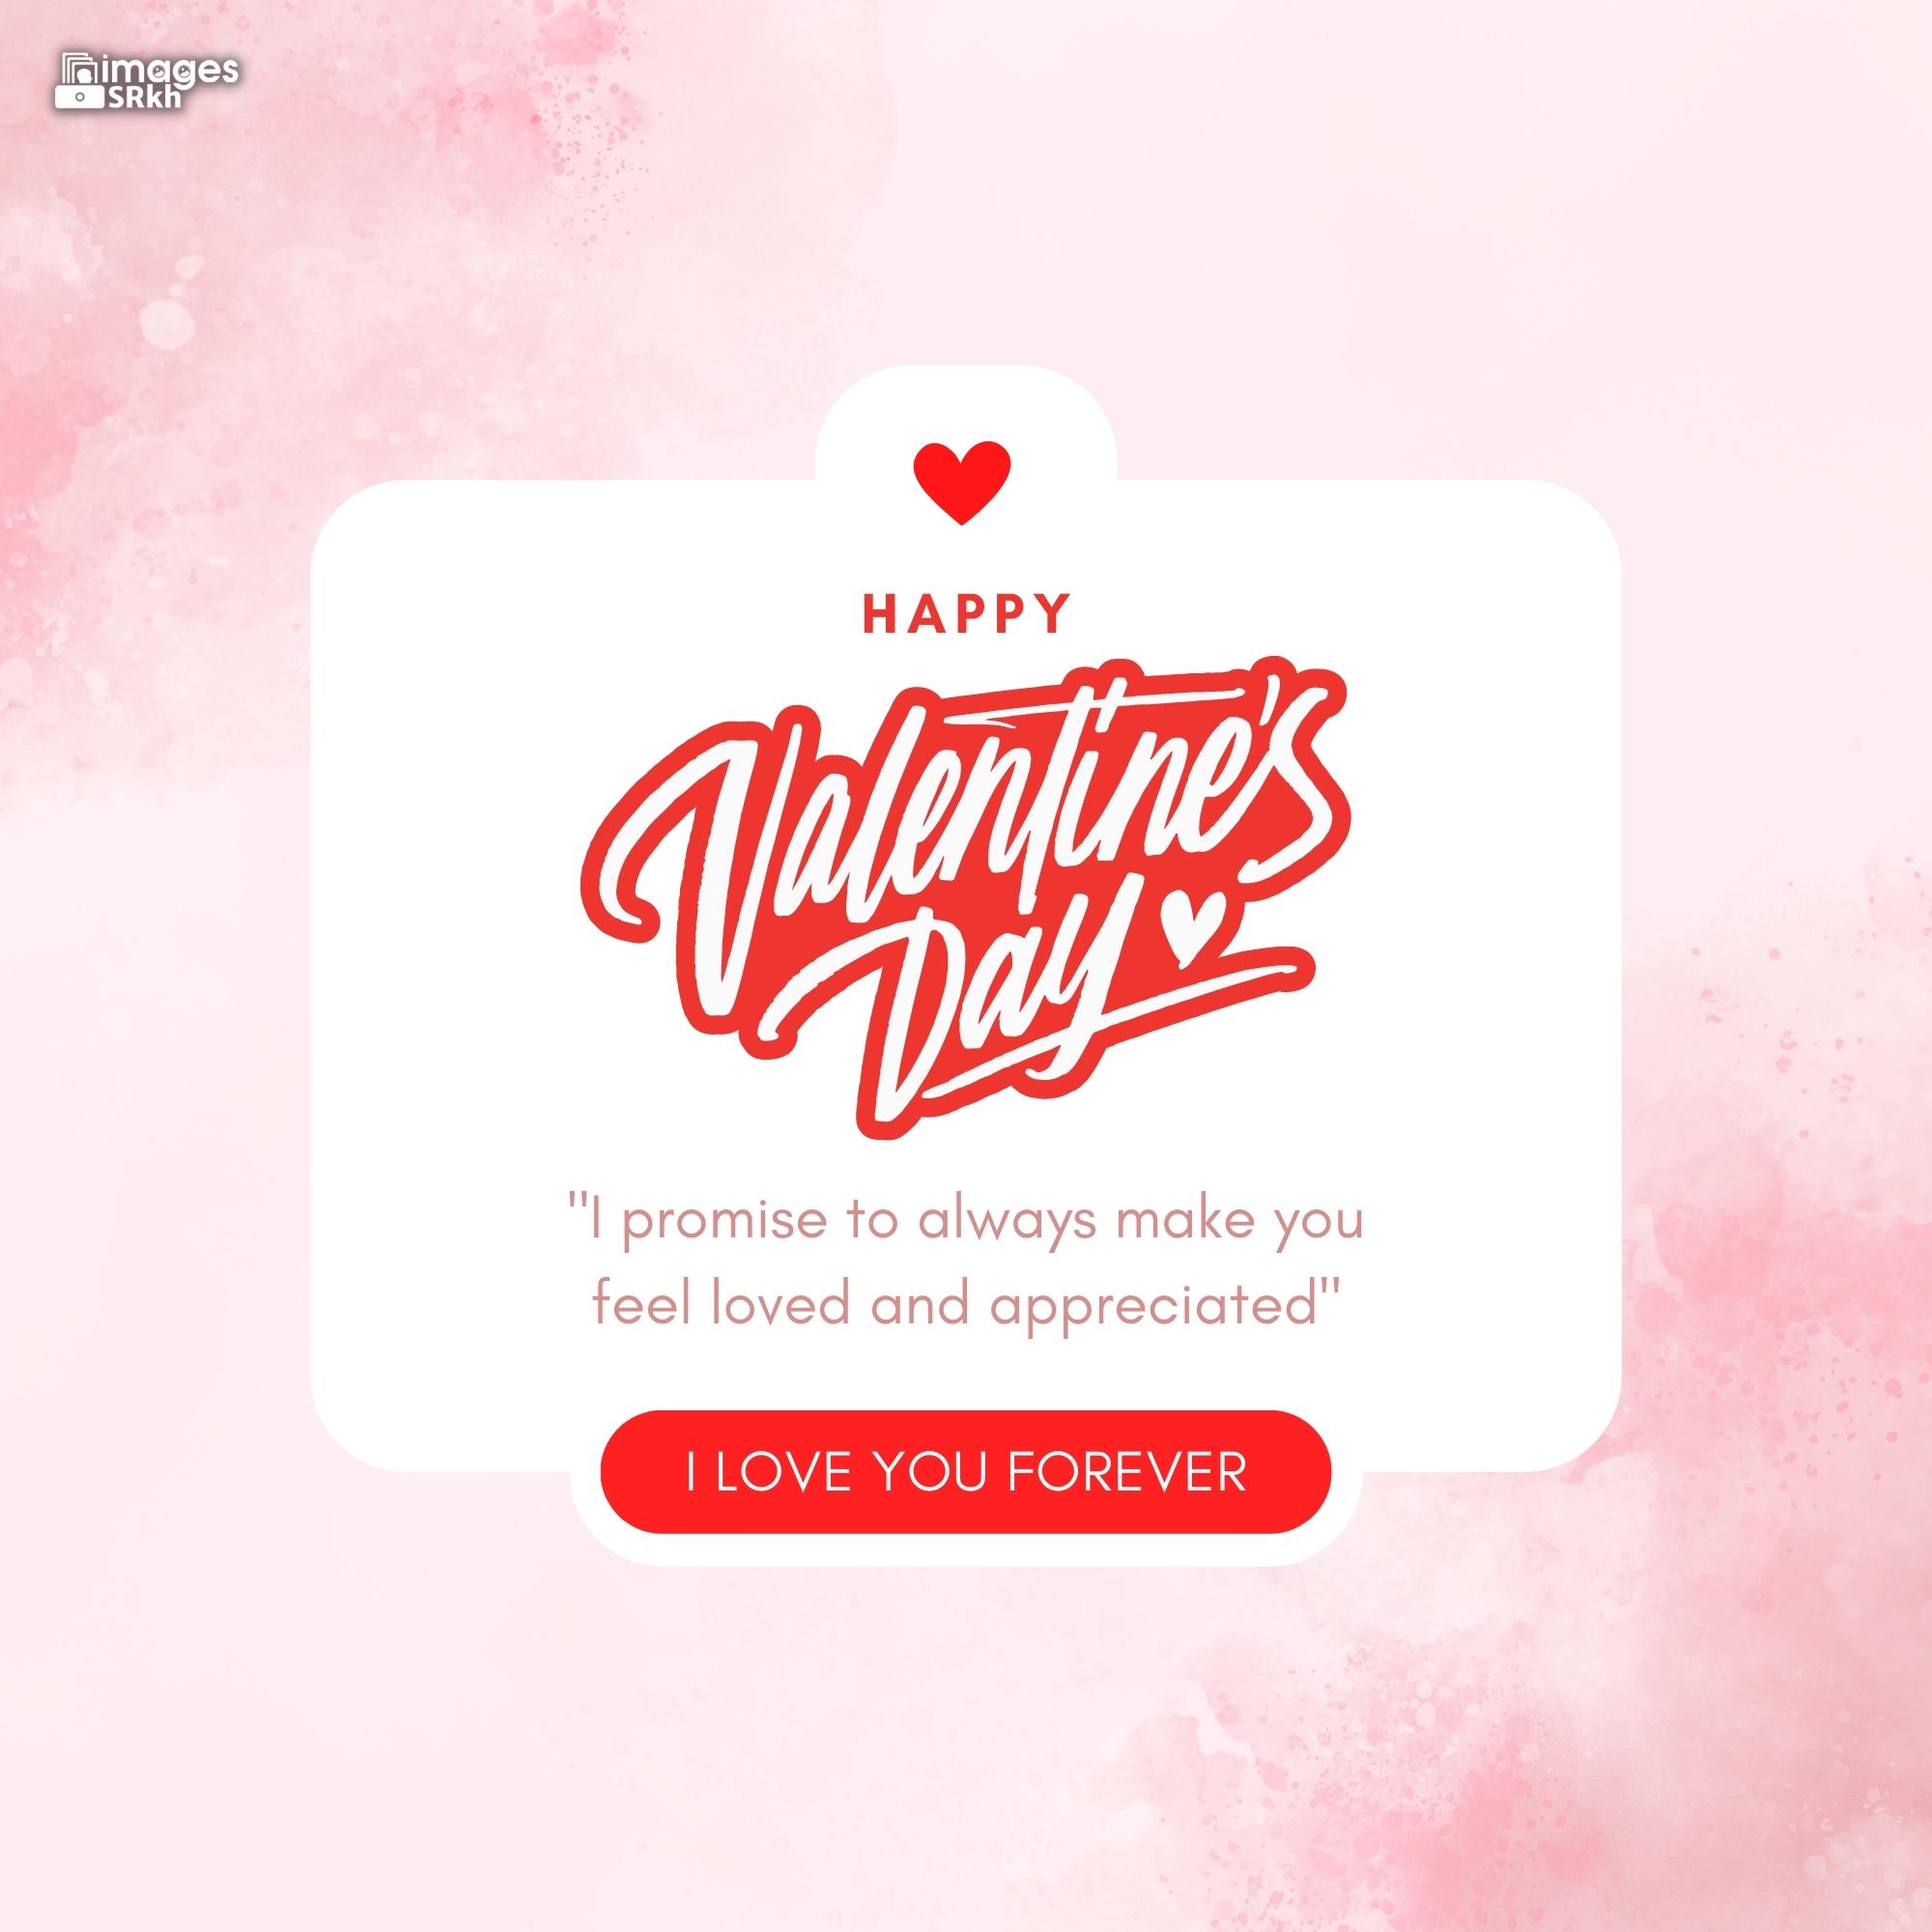 Happy Valentines Day | 520 | PREMIUM IMAGES | Wishes for Love